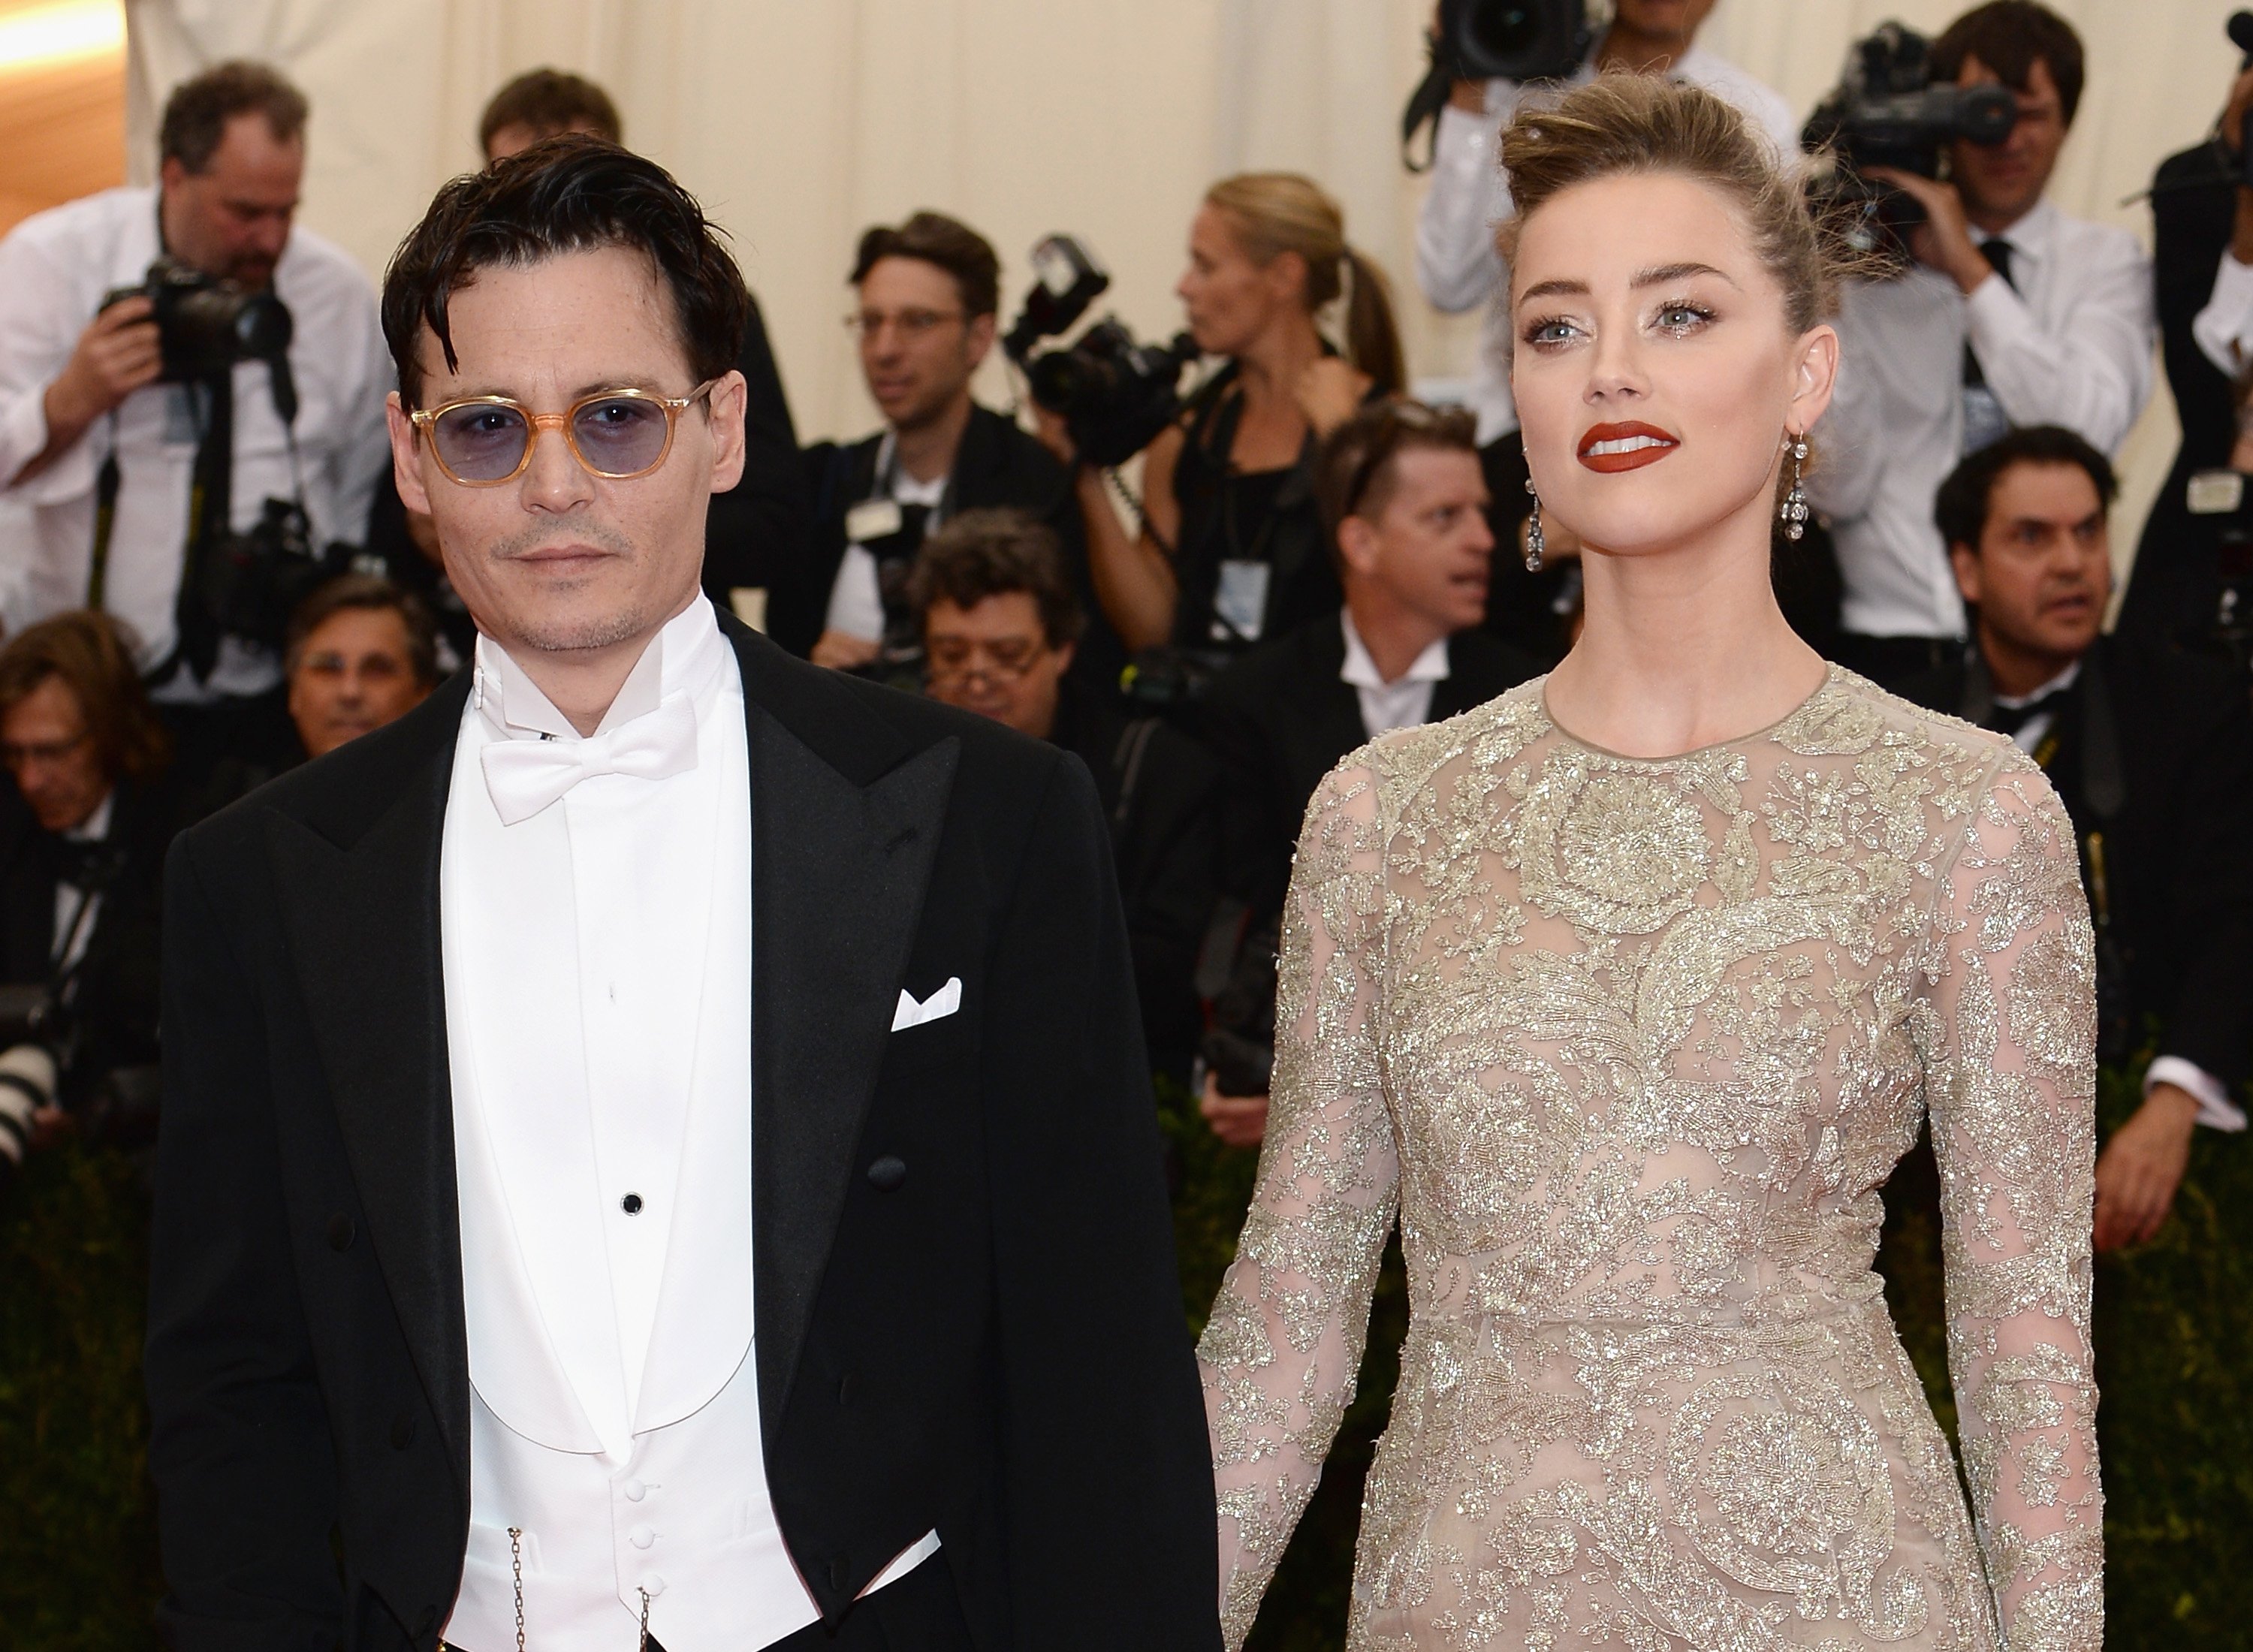 Johnny Depp and Amber Heard at the "Charles James: Beyond Fashion" Costume Institute Gala on May 5, 2014, in New York City. | Source: Getty Images